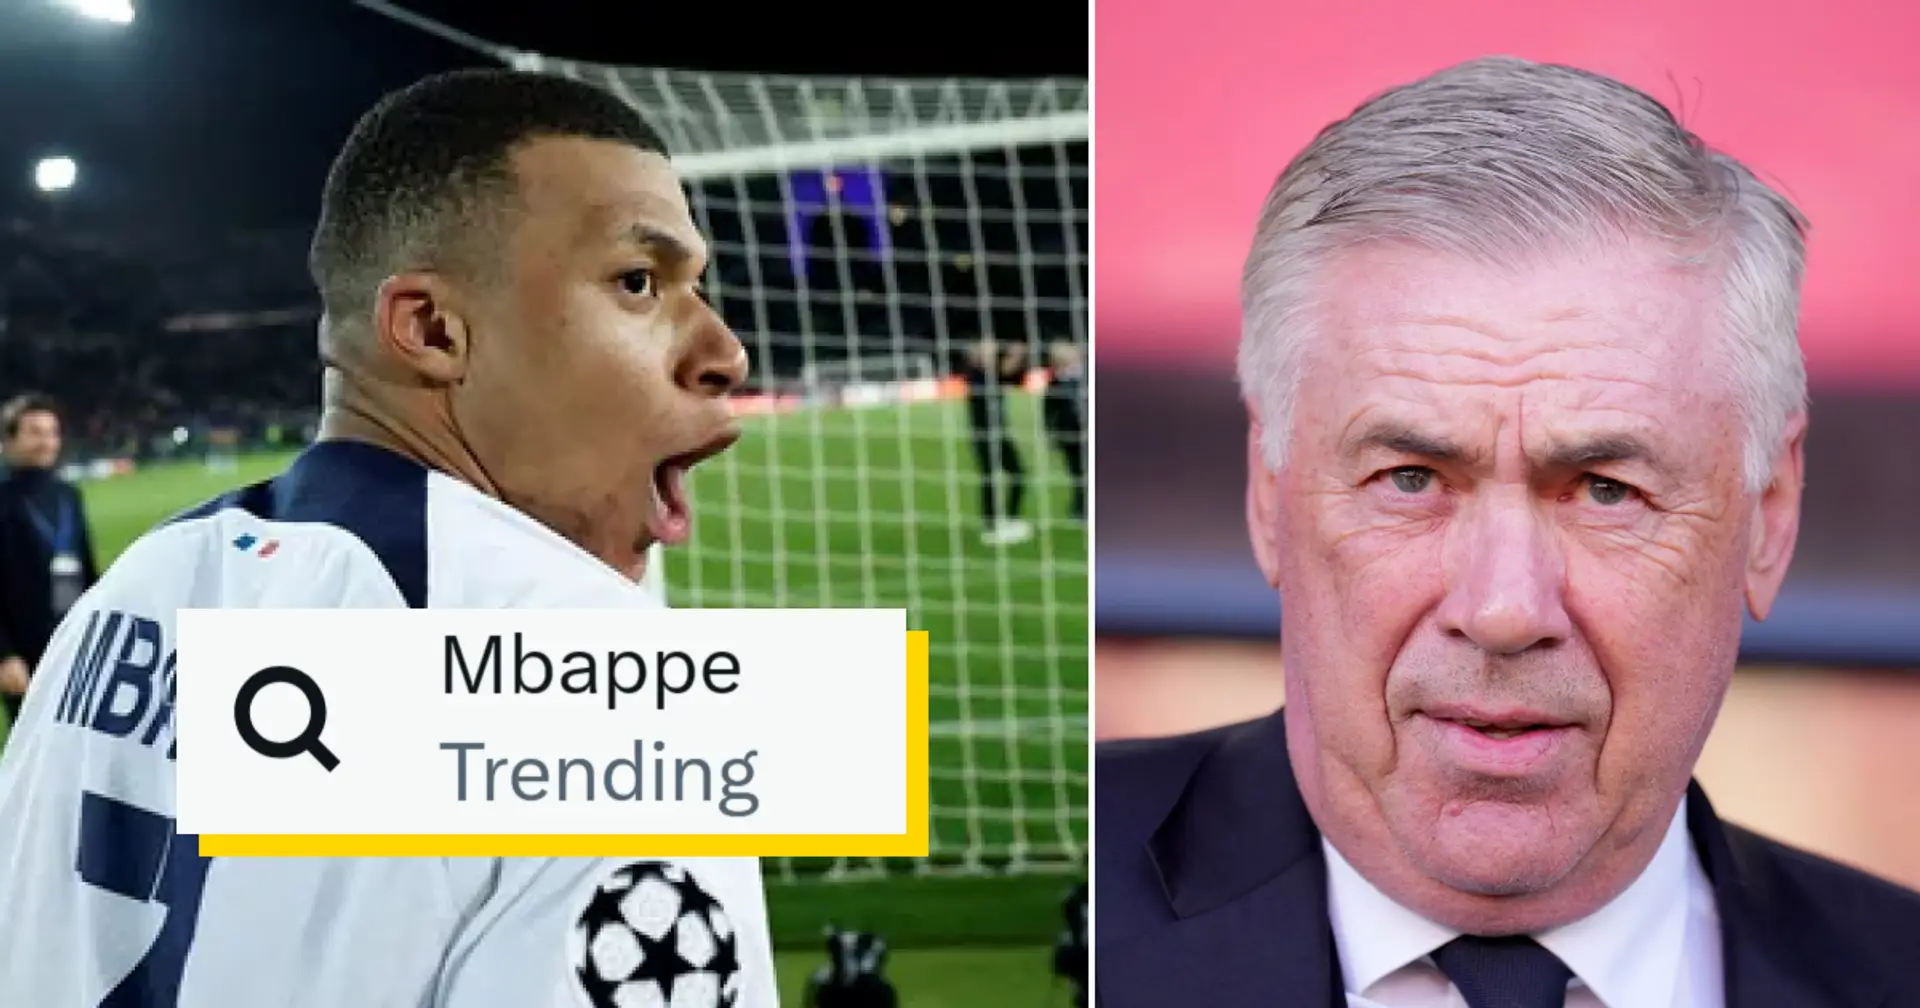 Kylian Mbappe trending among football fans after Man City quarterfinal — here is why